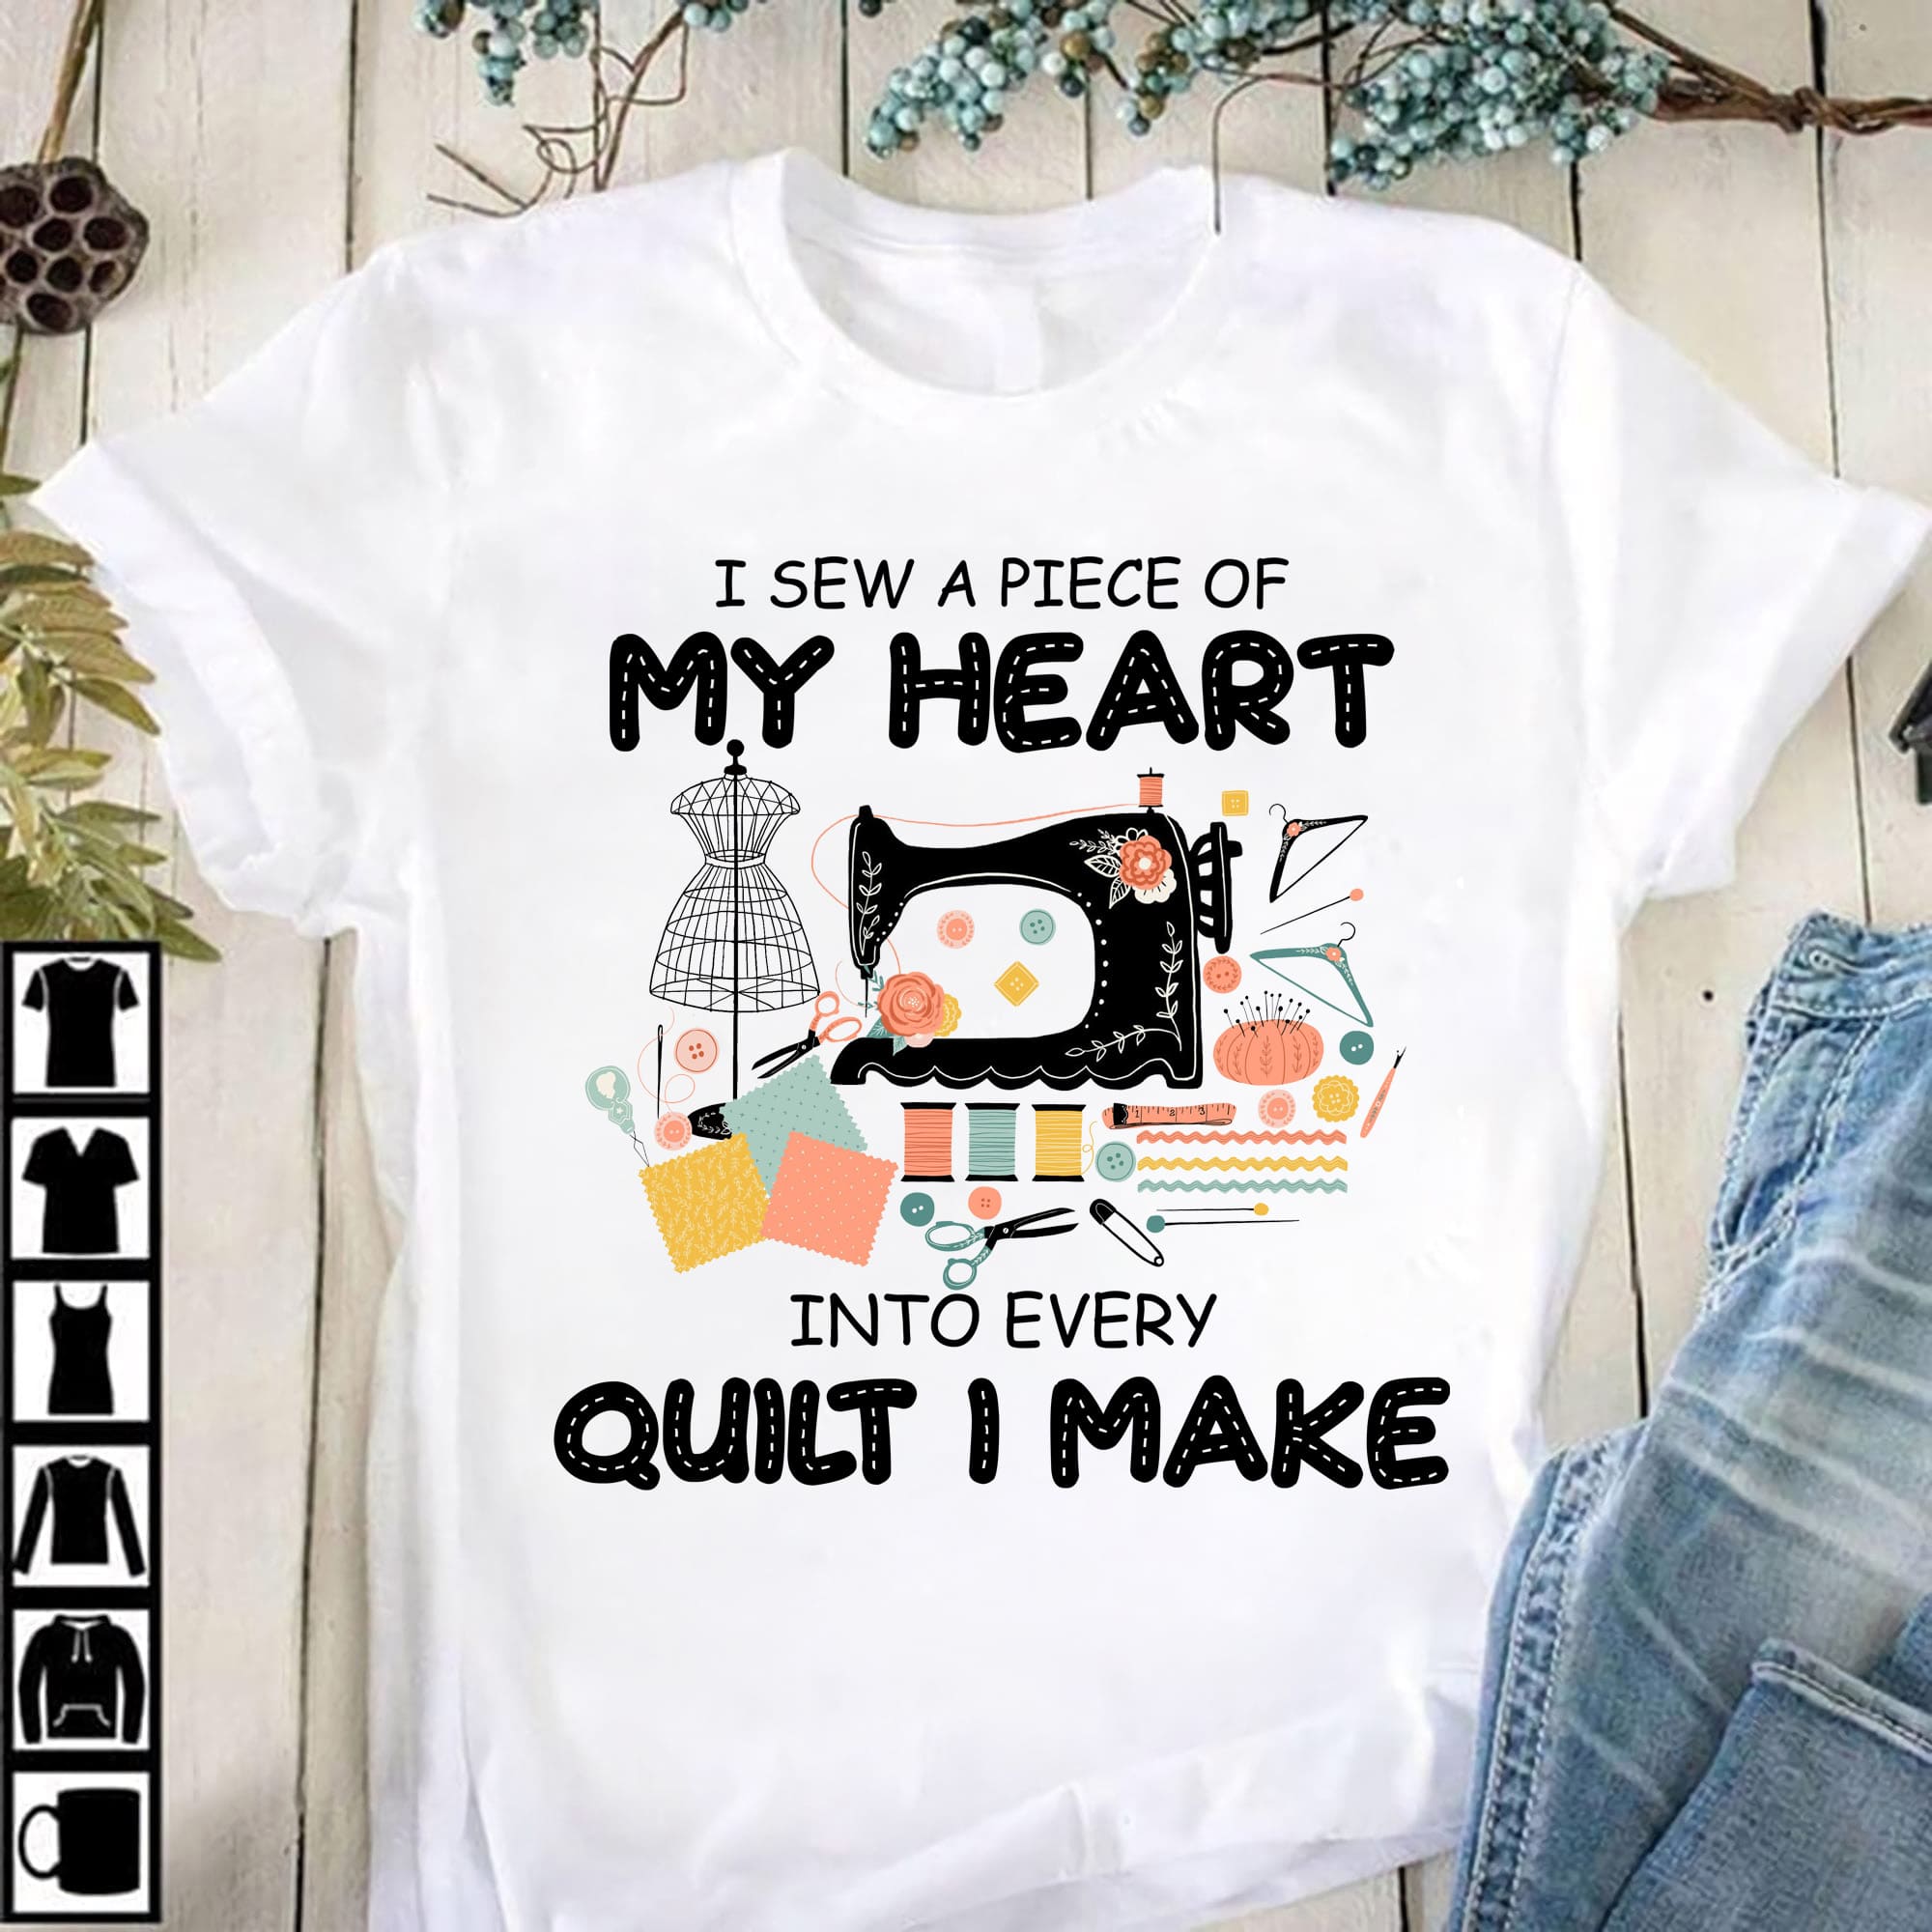 I sew a piece of my heart into every quilt I make - Sewing people gift, Sewing machine graphic T-shirt